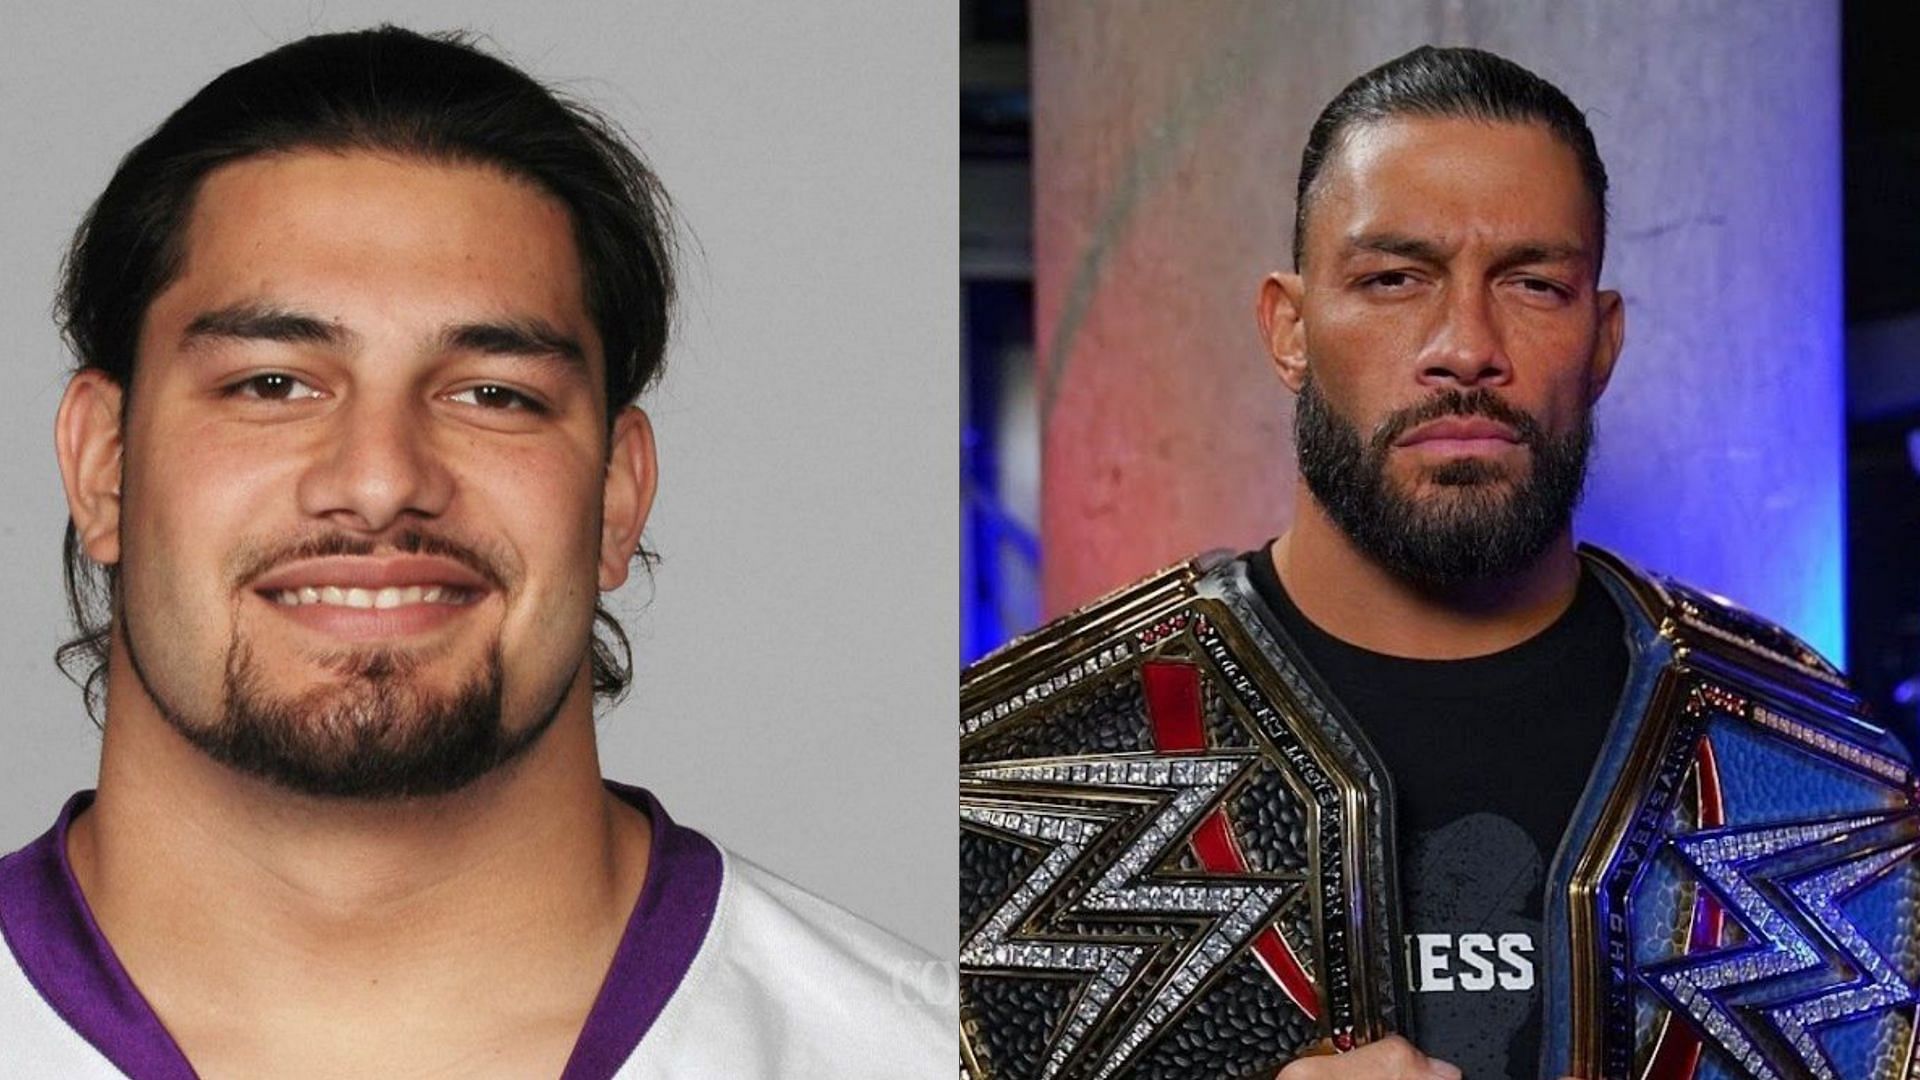 Roman Reigns had nasal reconstruction surgery in 2016